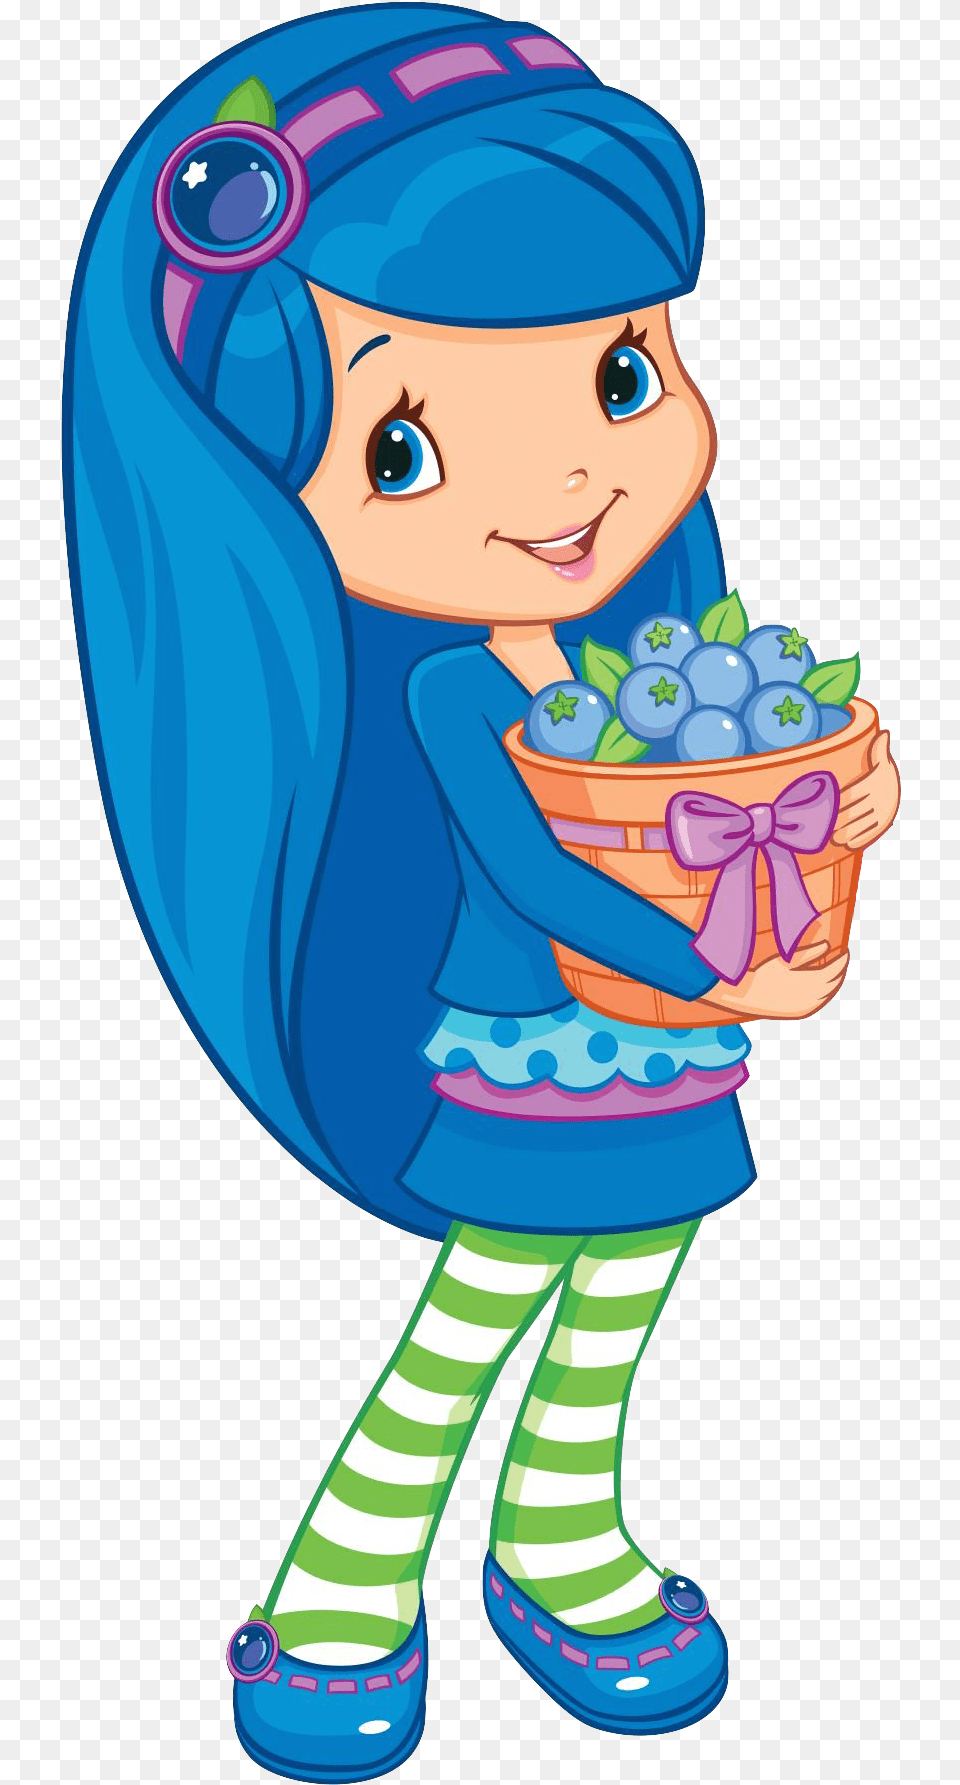 Blueberry Muffin Render Strawberry Shortcake Cartoon Blueberry, Baby, Photography, Person, Publication Free Transparent Png